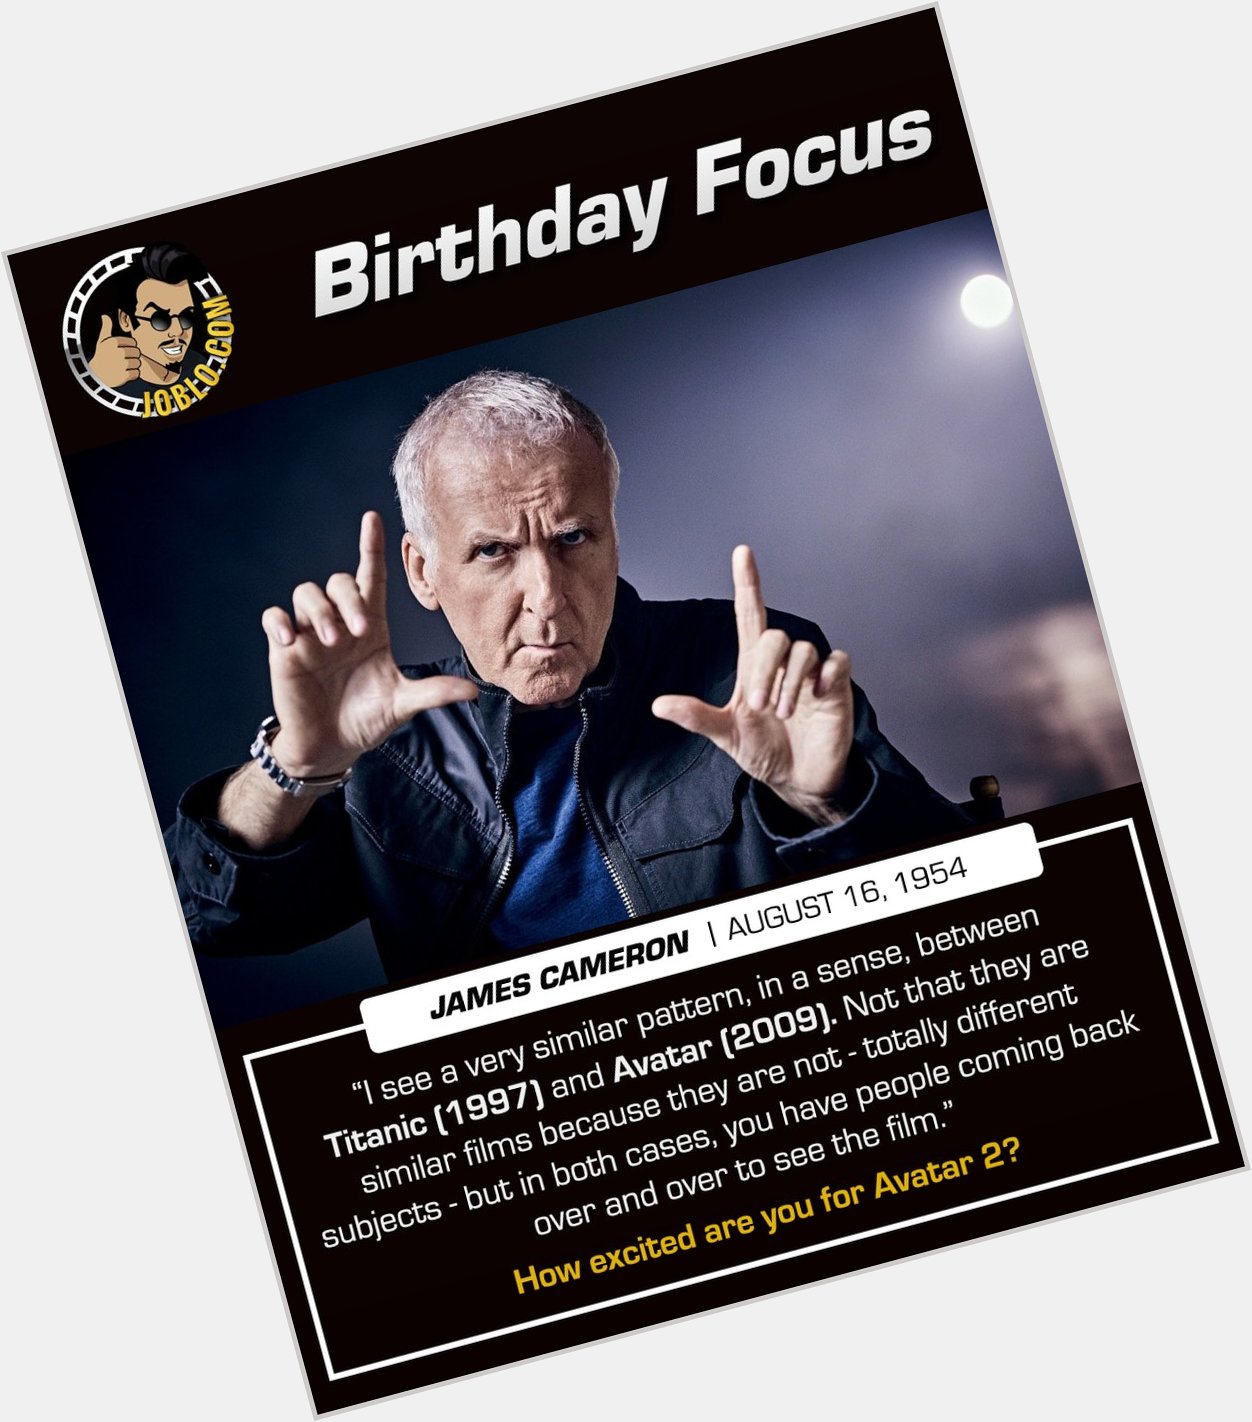 Happy birthday to legendary filmmaker, James Cameron!

Can\t wait to see what he does with Avatar 2! 